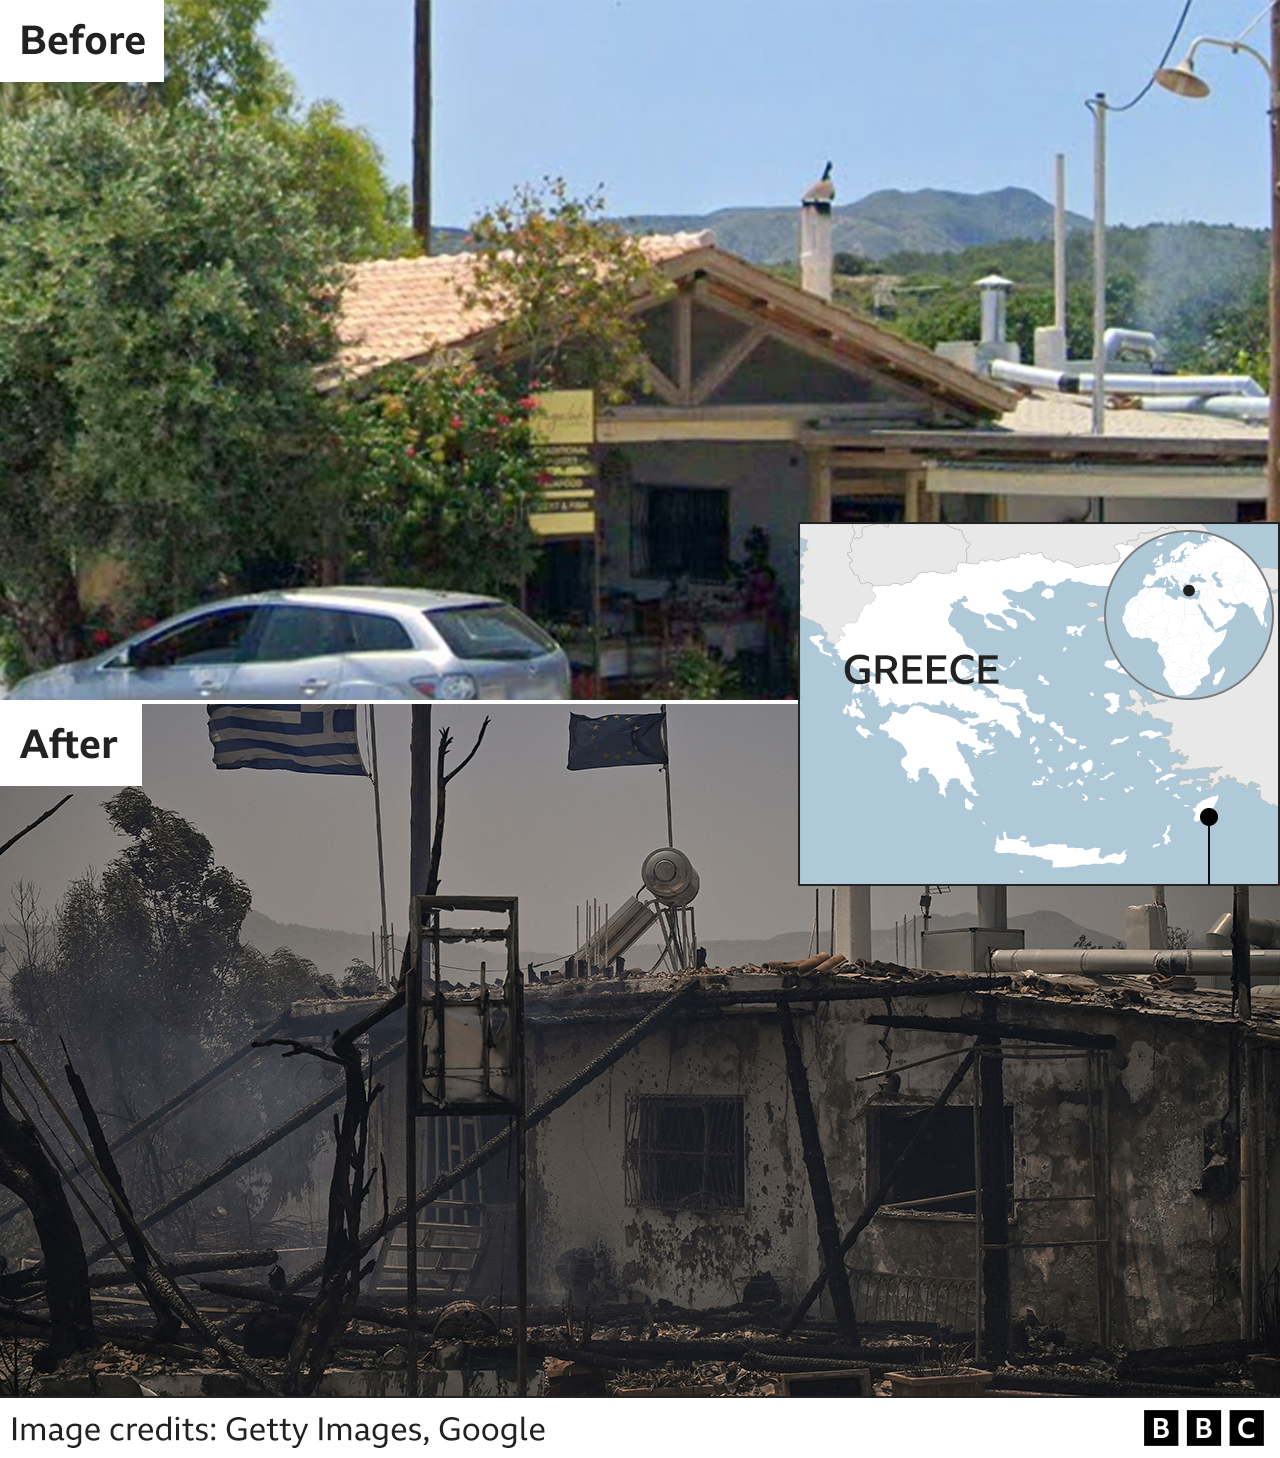 Before and after image showing a burnt down taverna in Kiotari